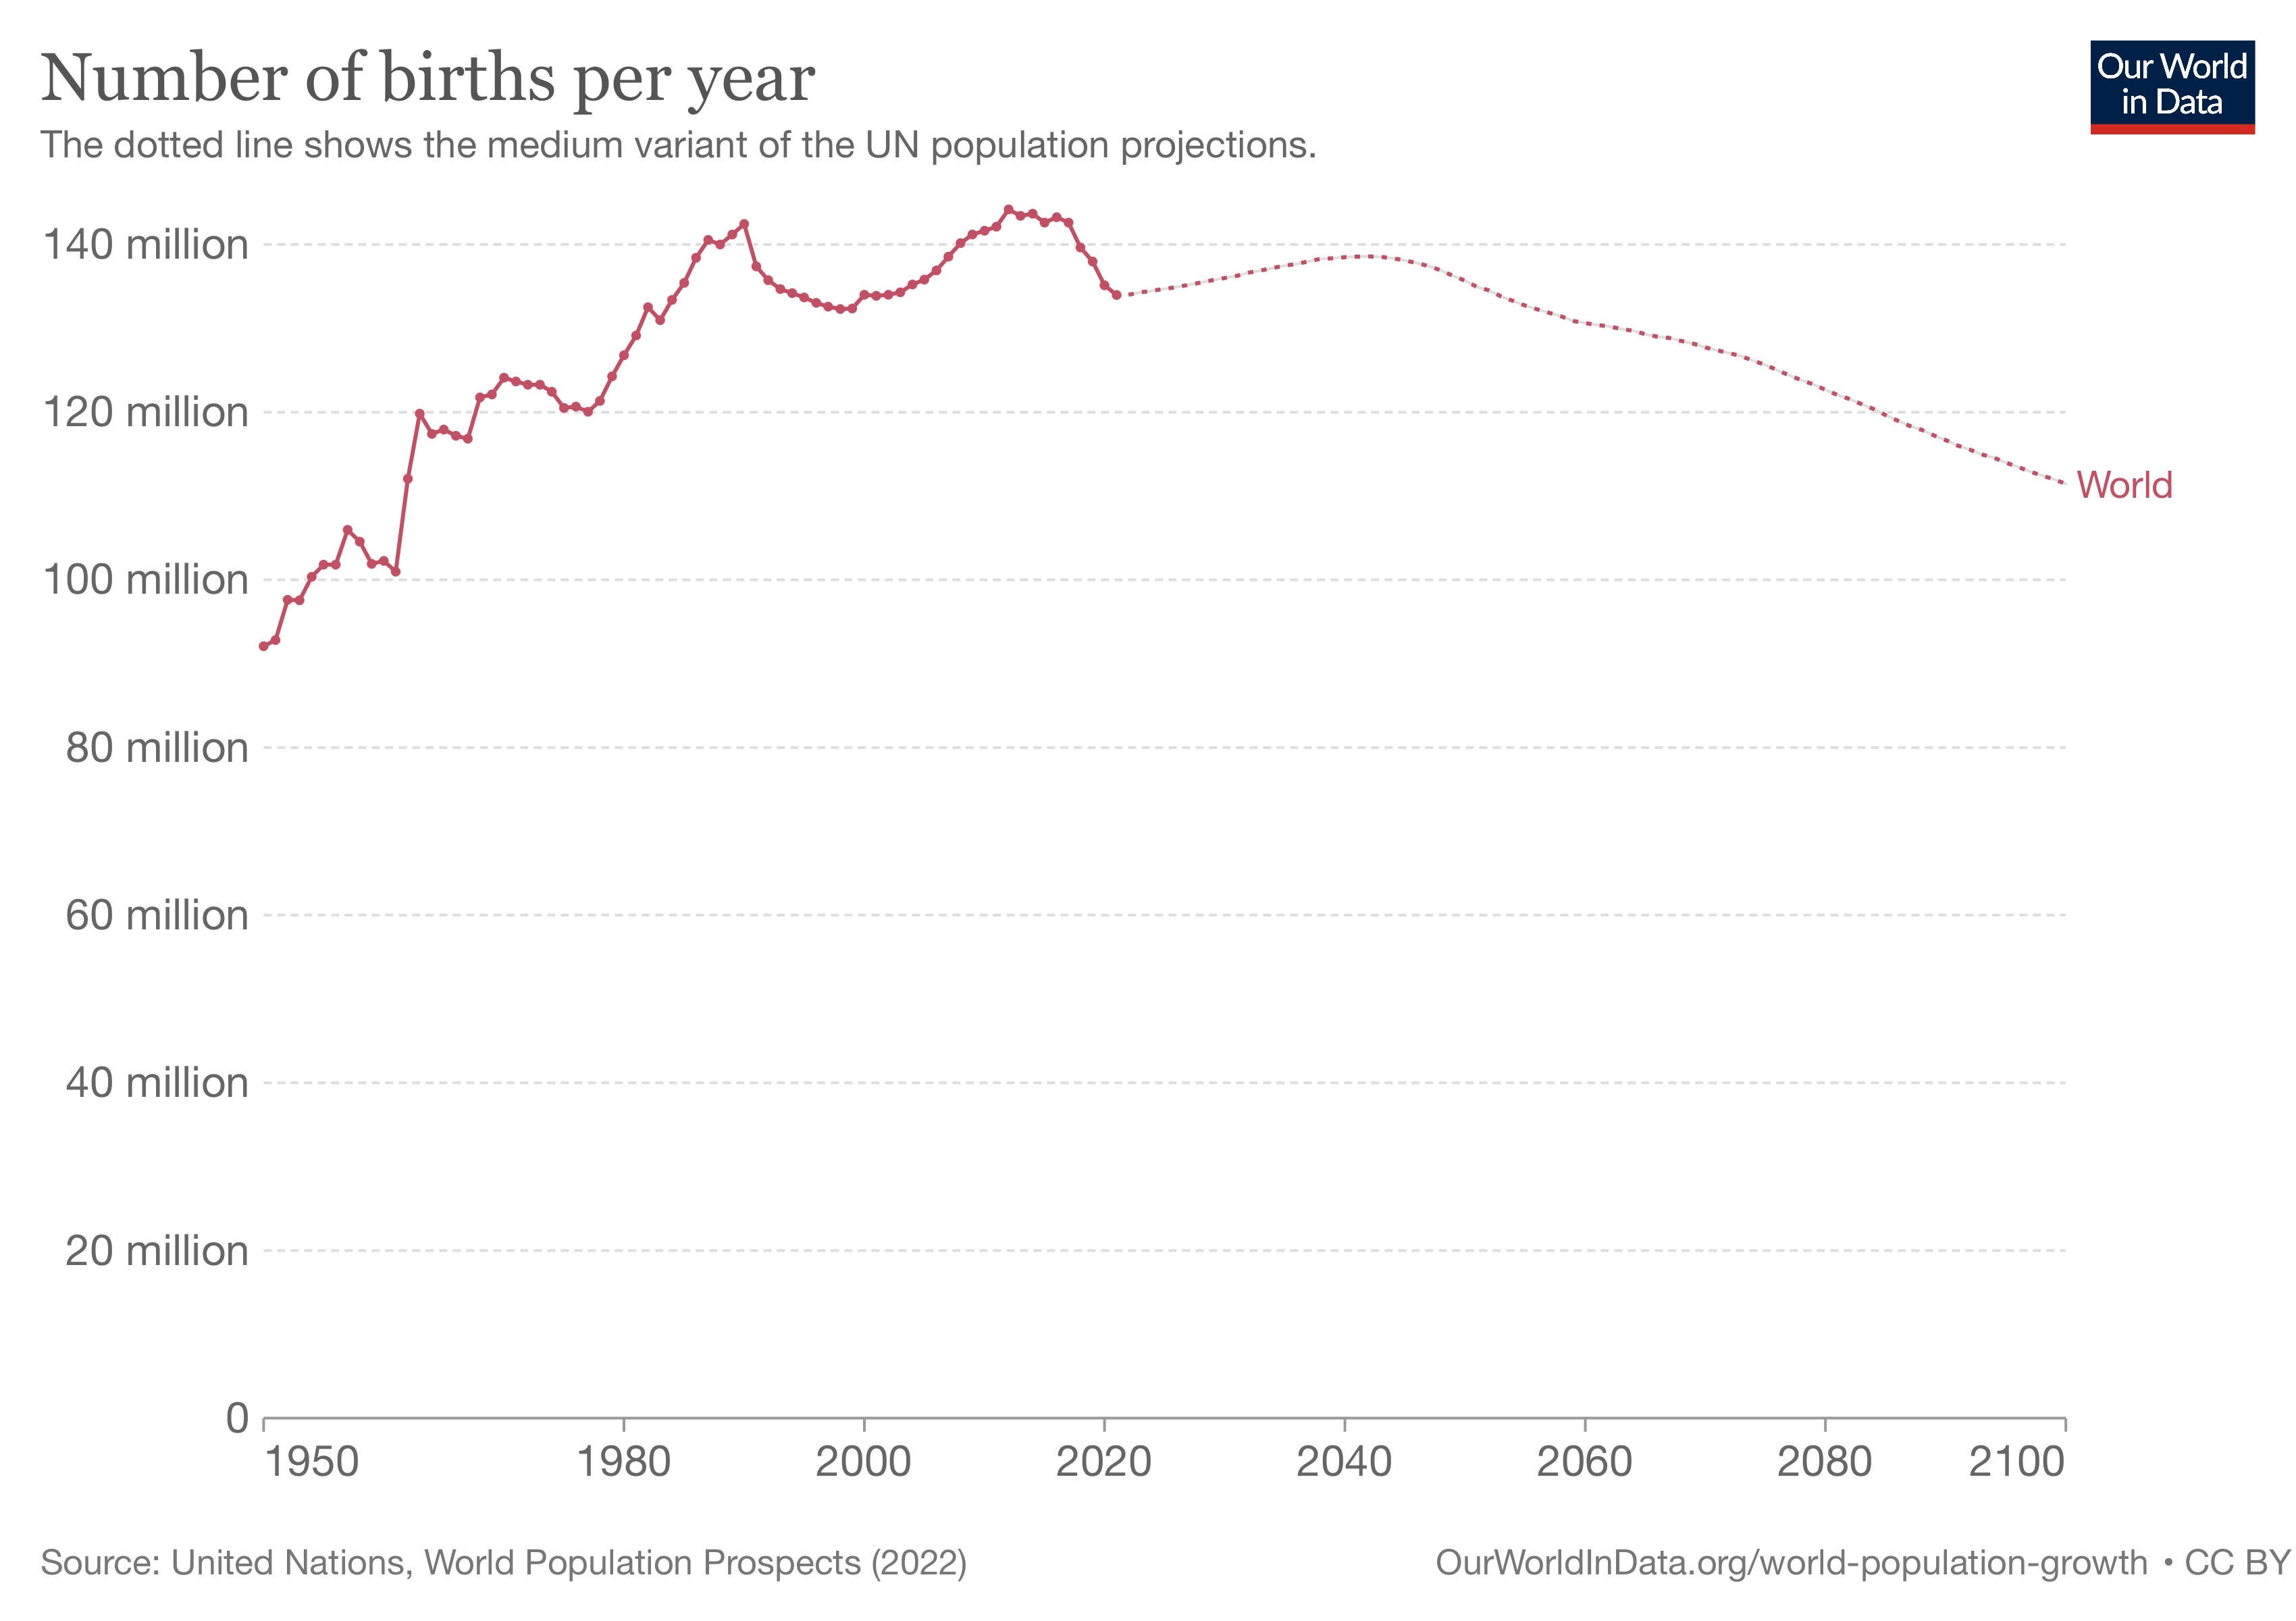 a line graph showing the number of births per year.